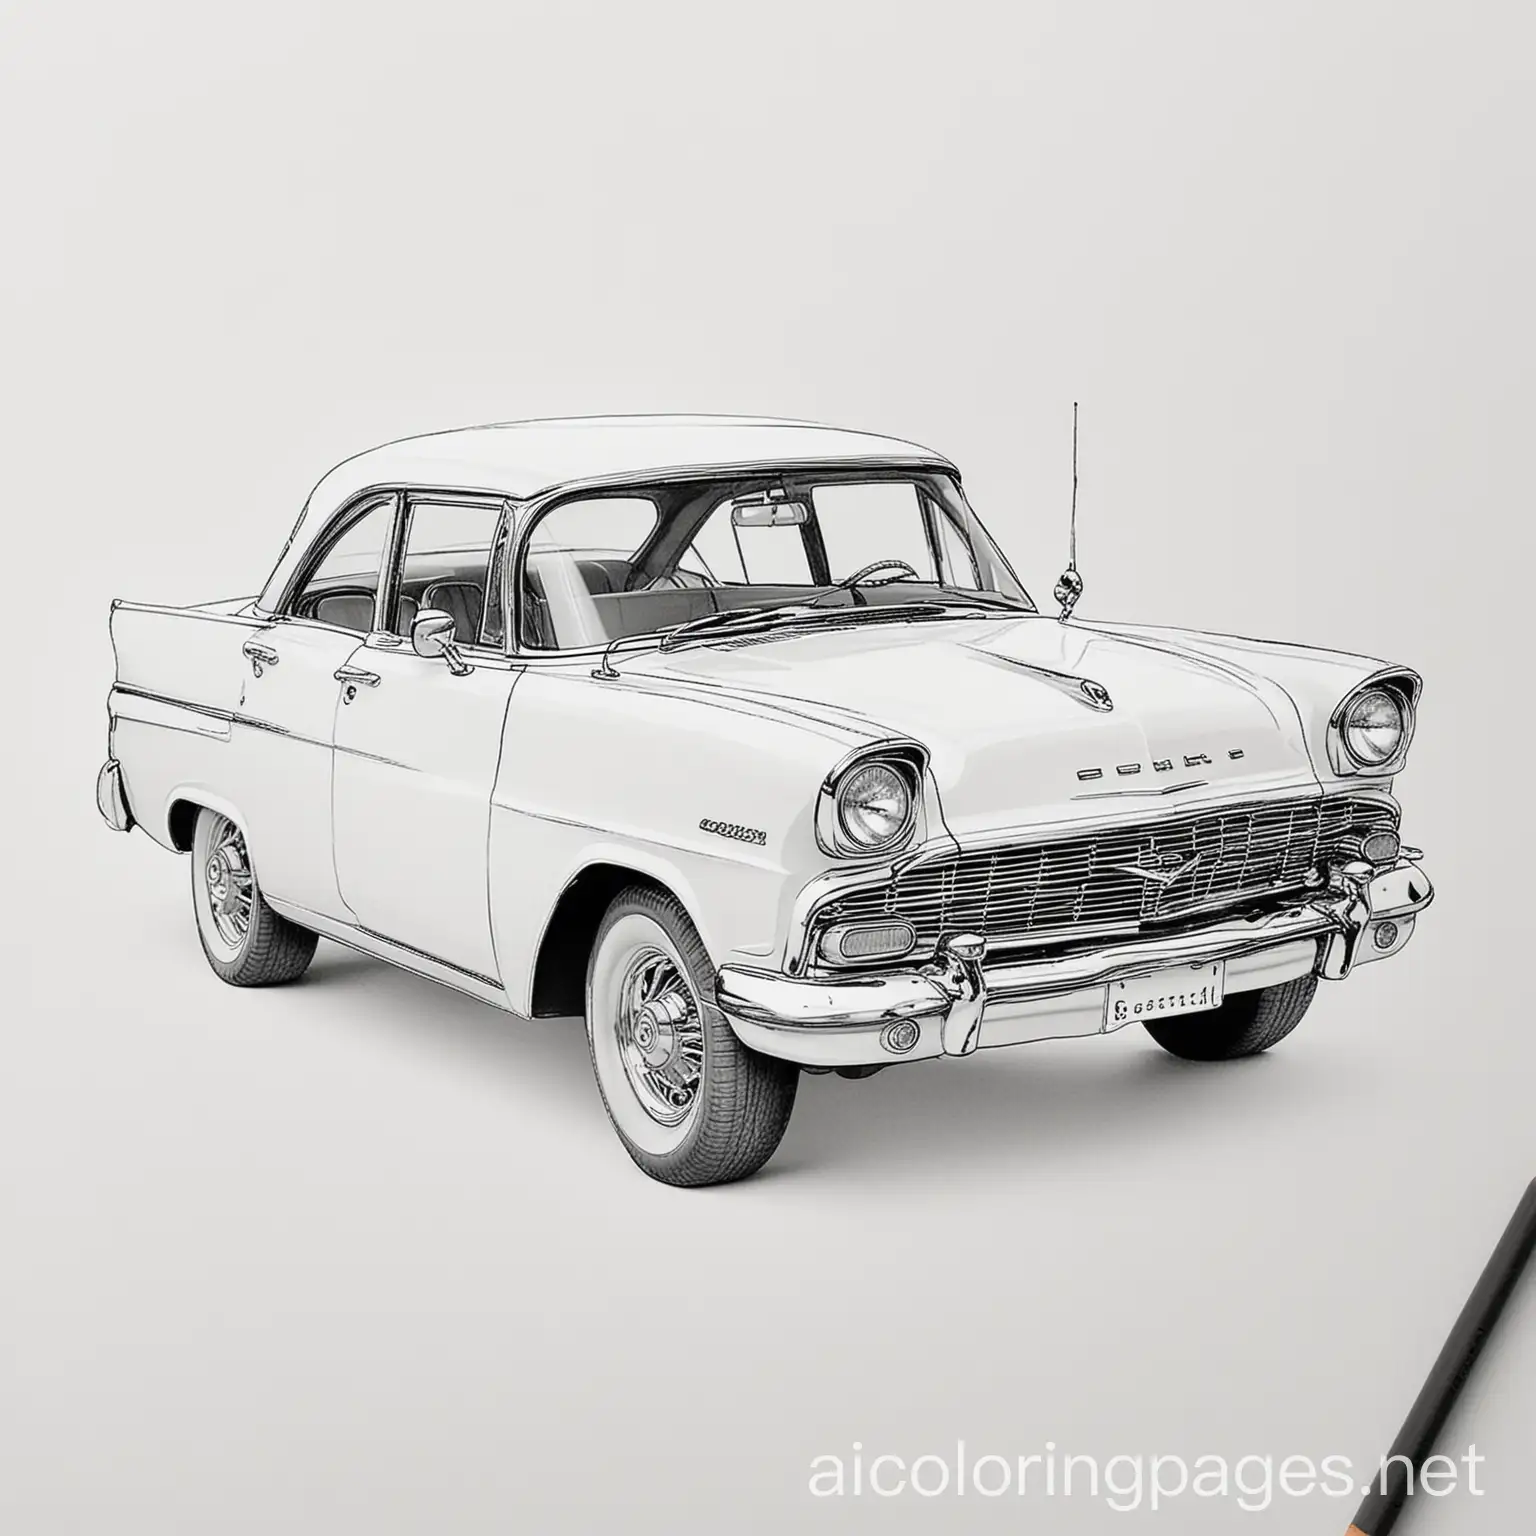 CAR, Coloring Page, black and white, line art, white background, Simplicity, Ample White Space